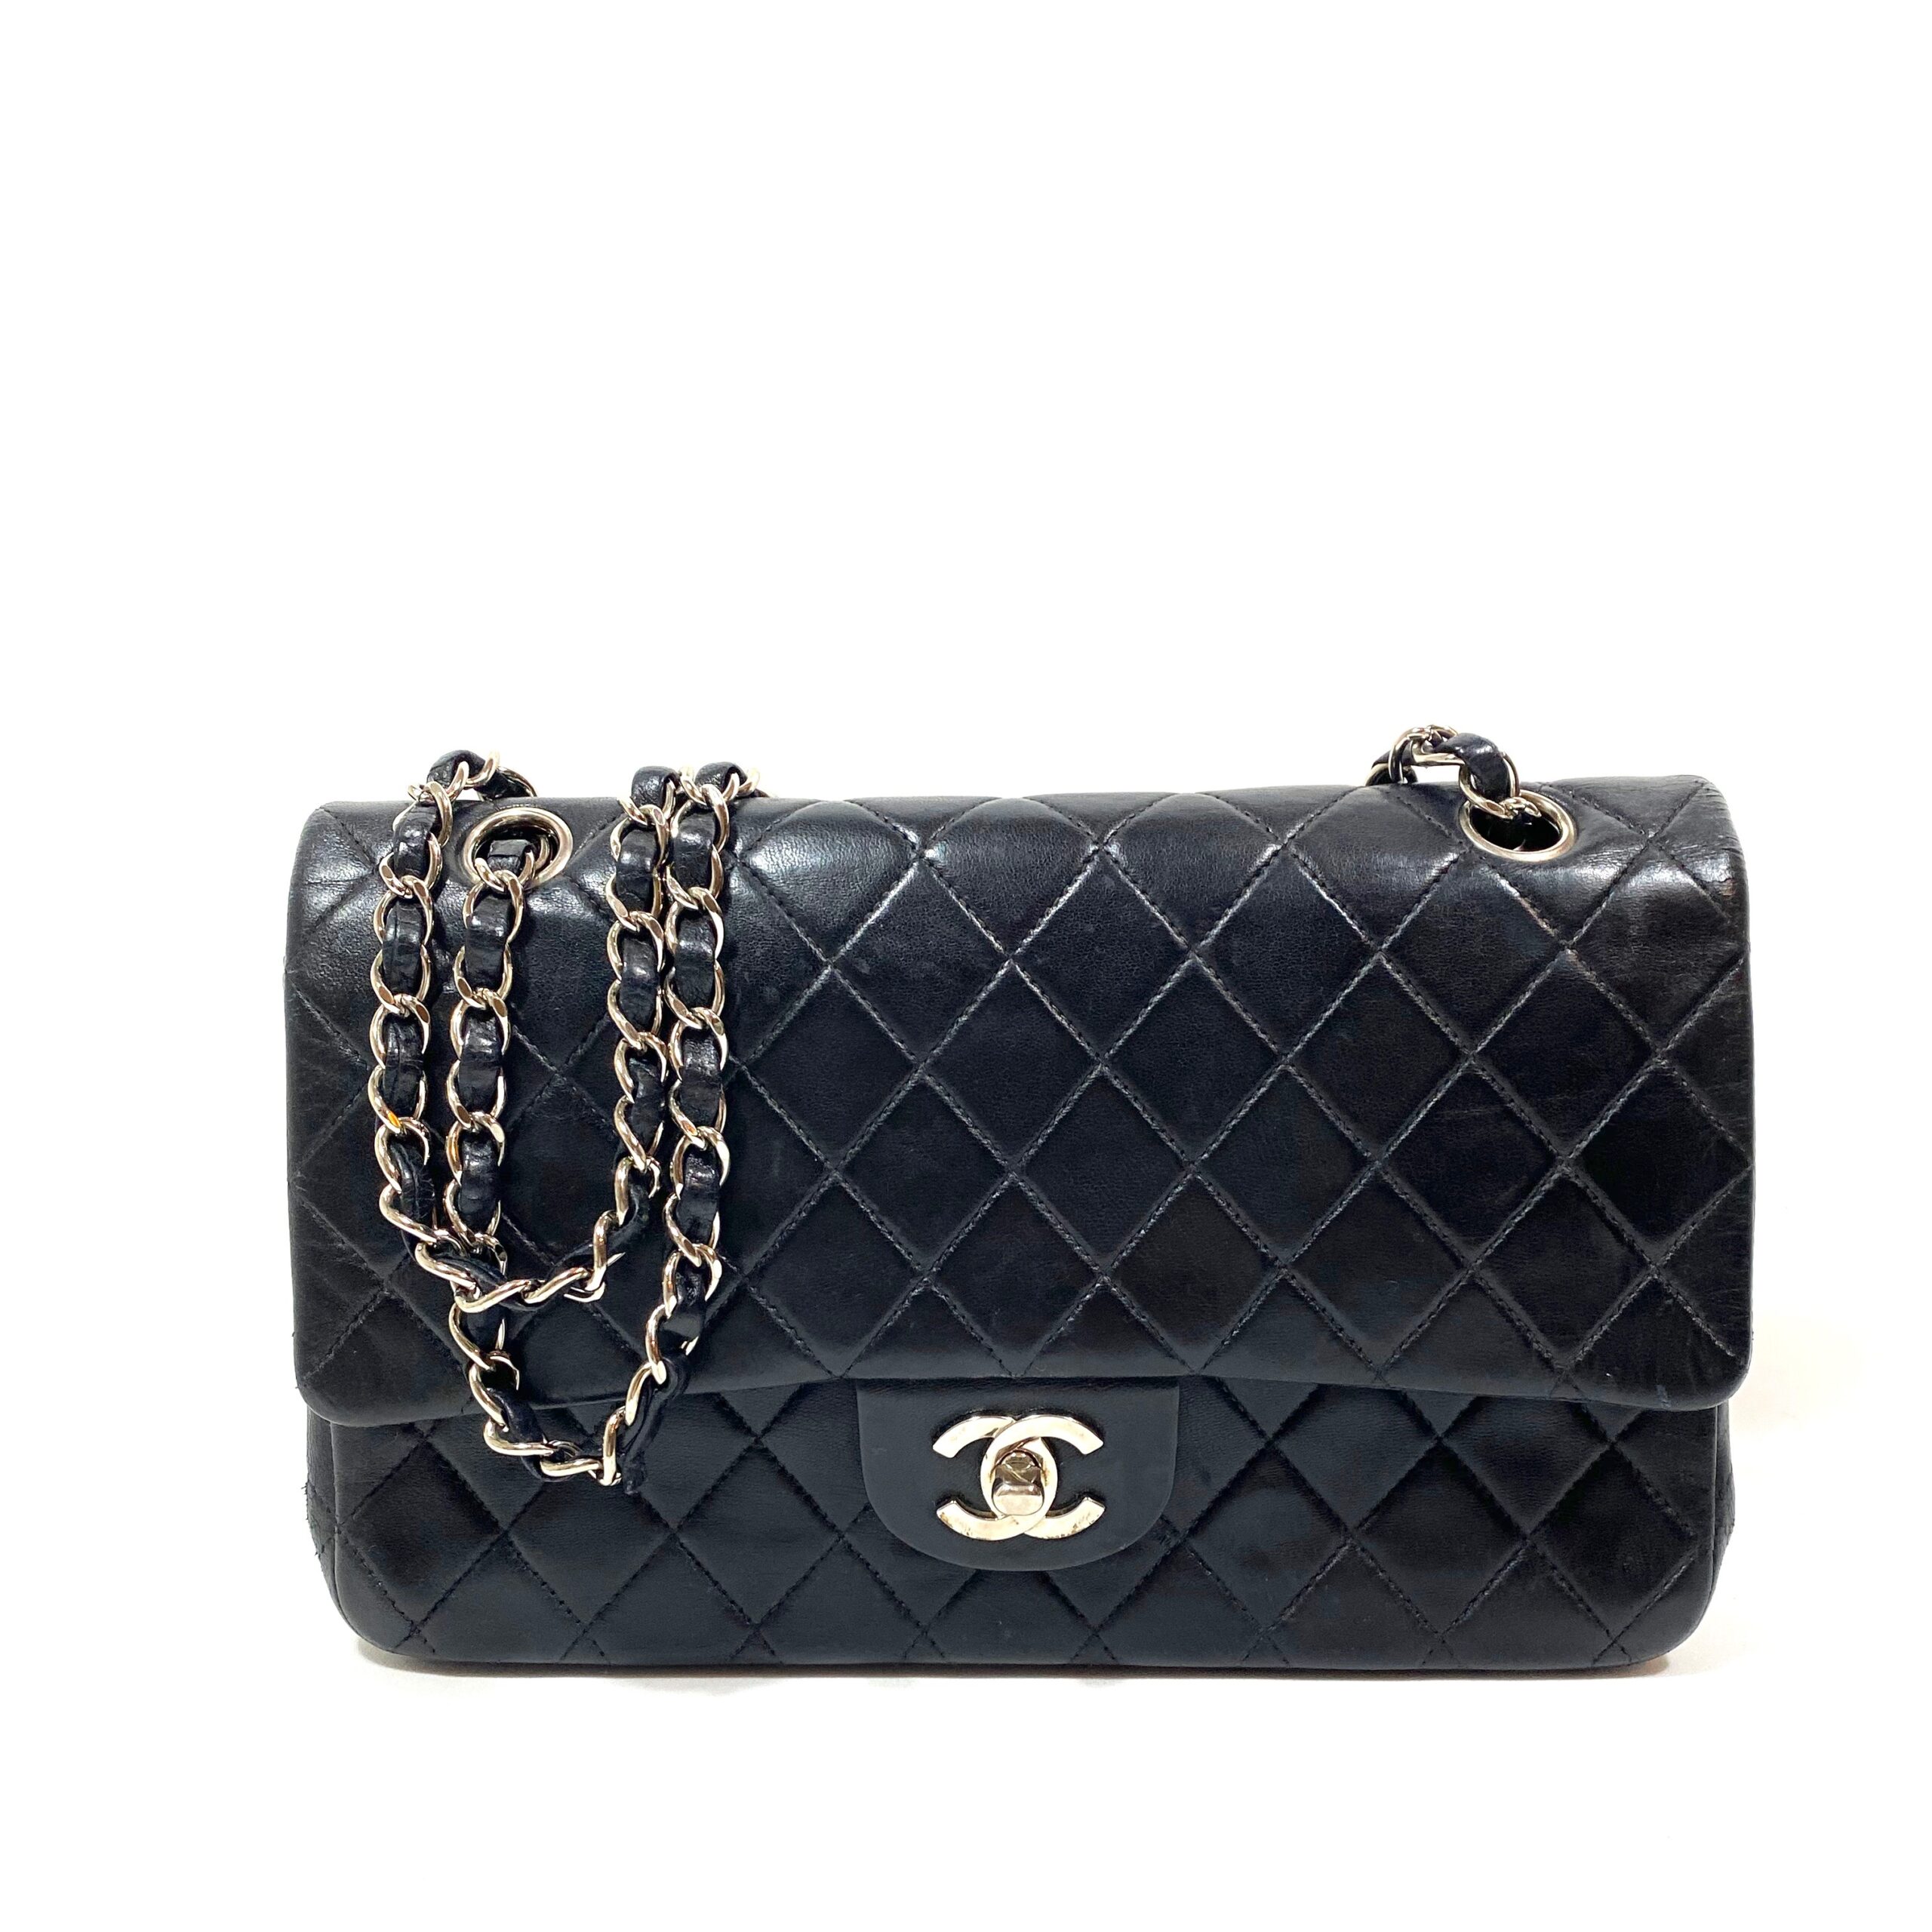 CHANEL BLACK MEDIUM DOUBLE FLAP QUILTED SHOULDER BAG - Still in fashion